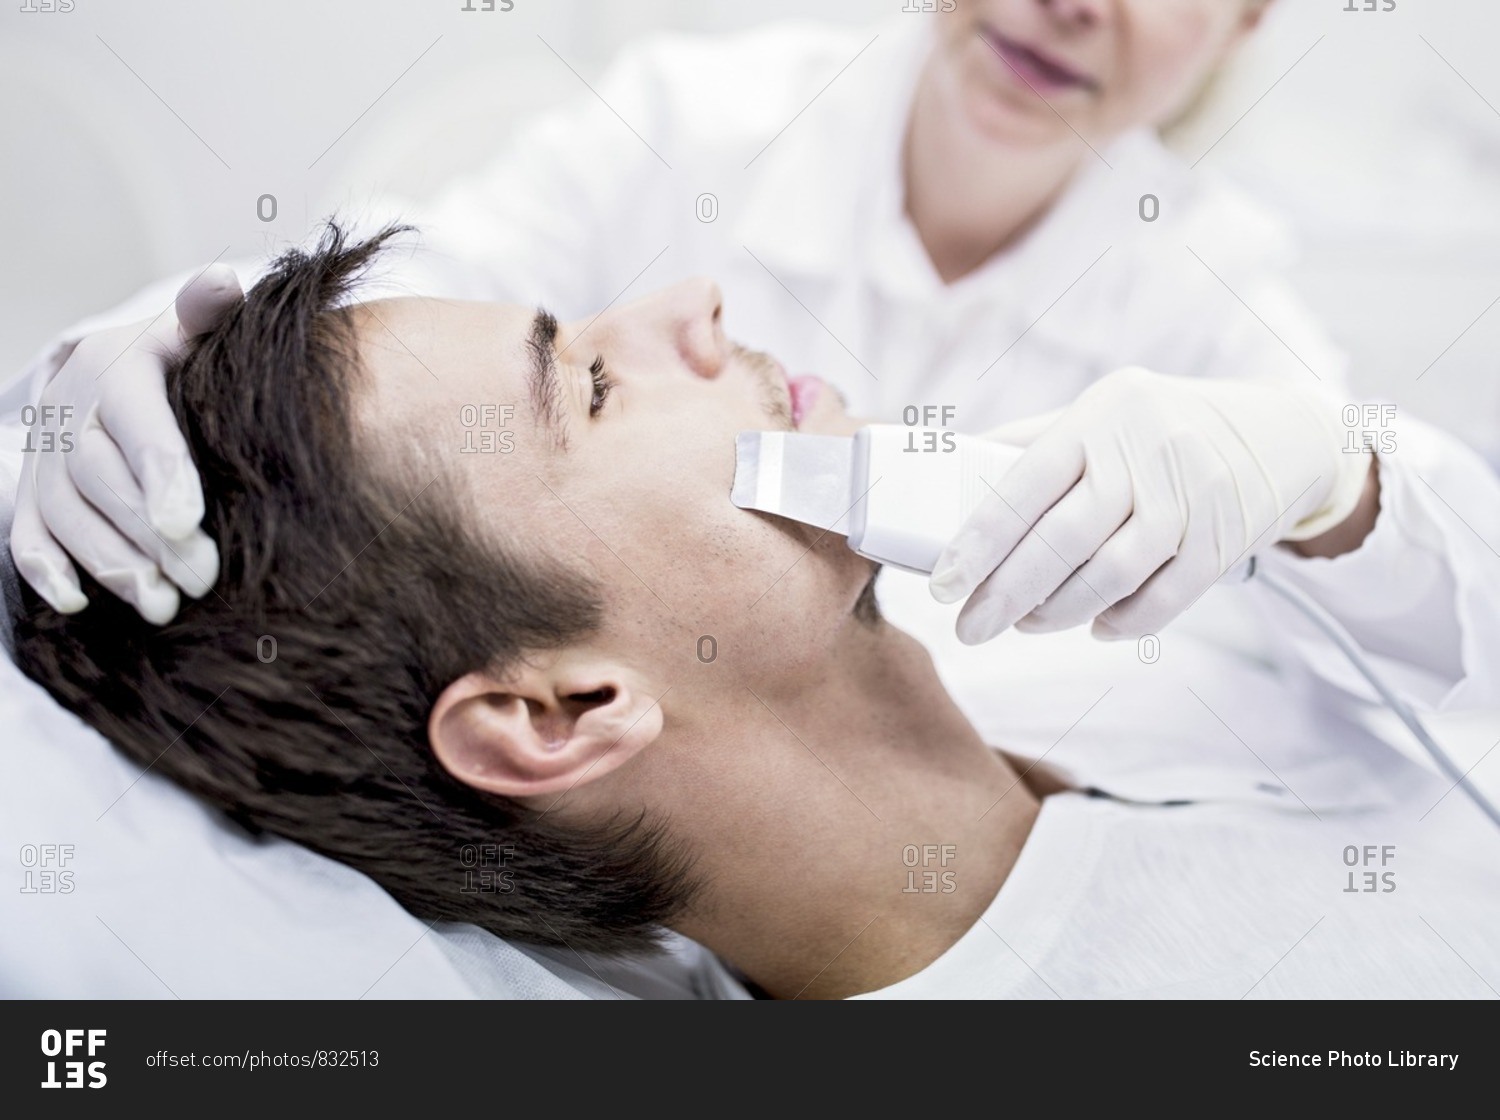 Dermatologist applying facial microdermabrasion treatment on man in clinic, close-up. The cosmetic procedure uses micro crystals to remove dead skin cells. This exfoliating treatment can stimulate the production of collagen and help improve fine lines and